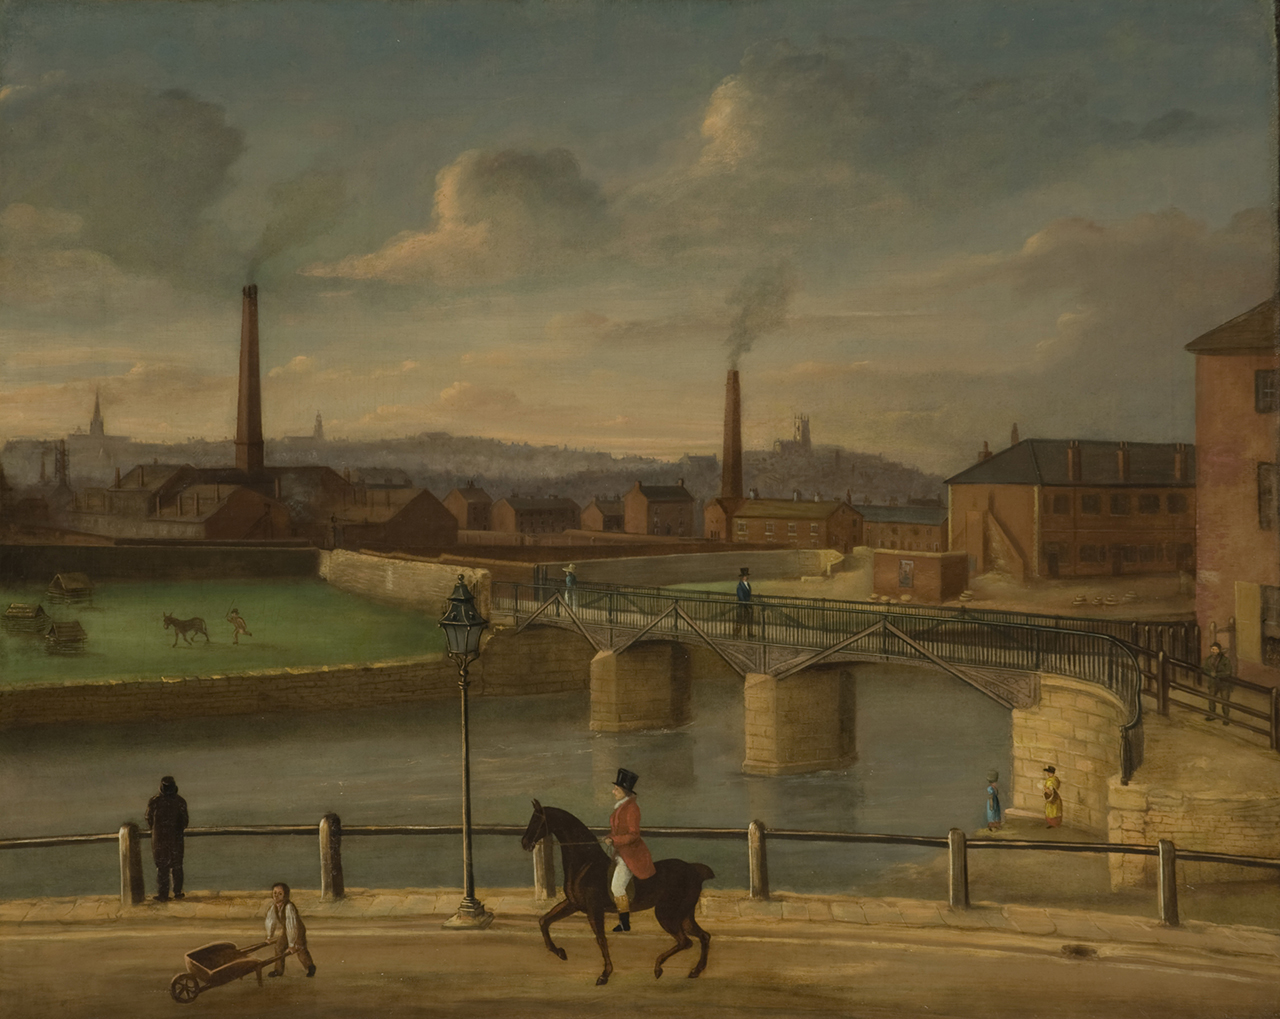 A large river or canal winds through an industrial landscape with smoking chimneys. In the foreground a figure in a red jacket, white jodhpurs and a black top hat rides a horse along a bridleway. On the left of the painting livestock can be seen grazing in a green field.